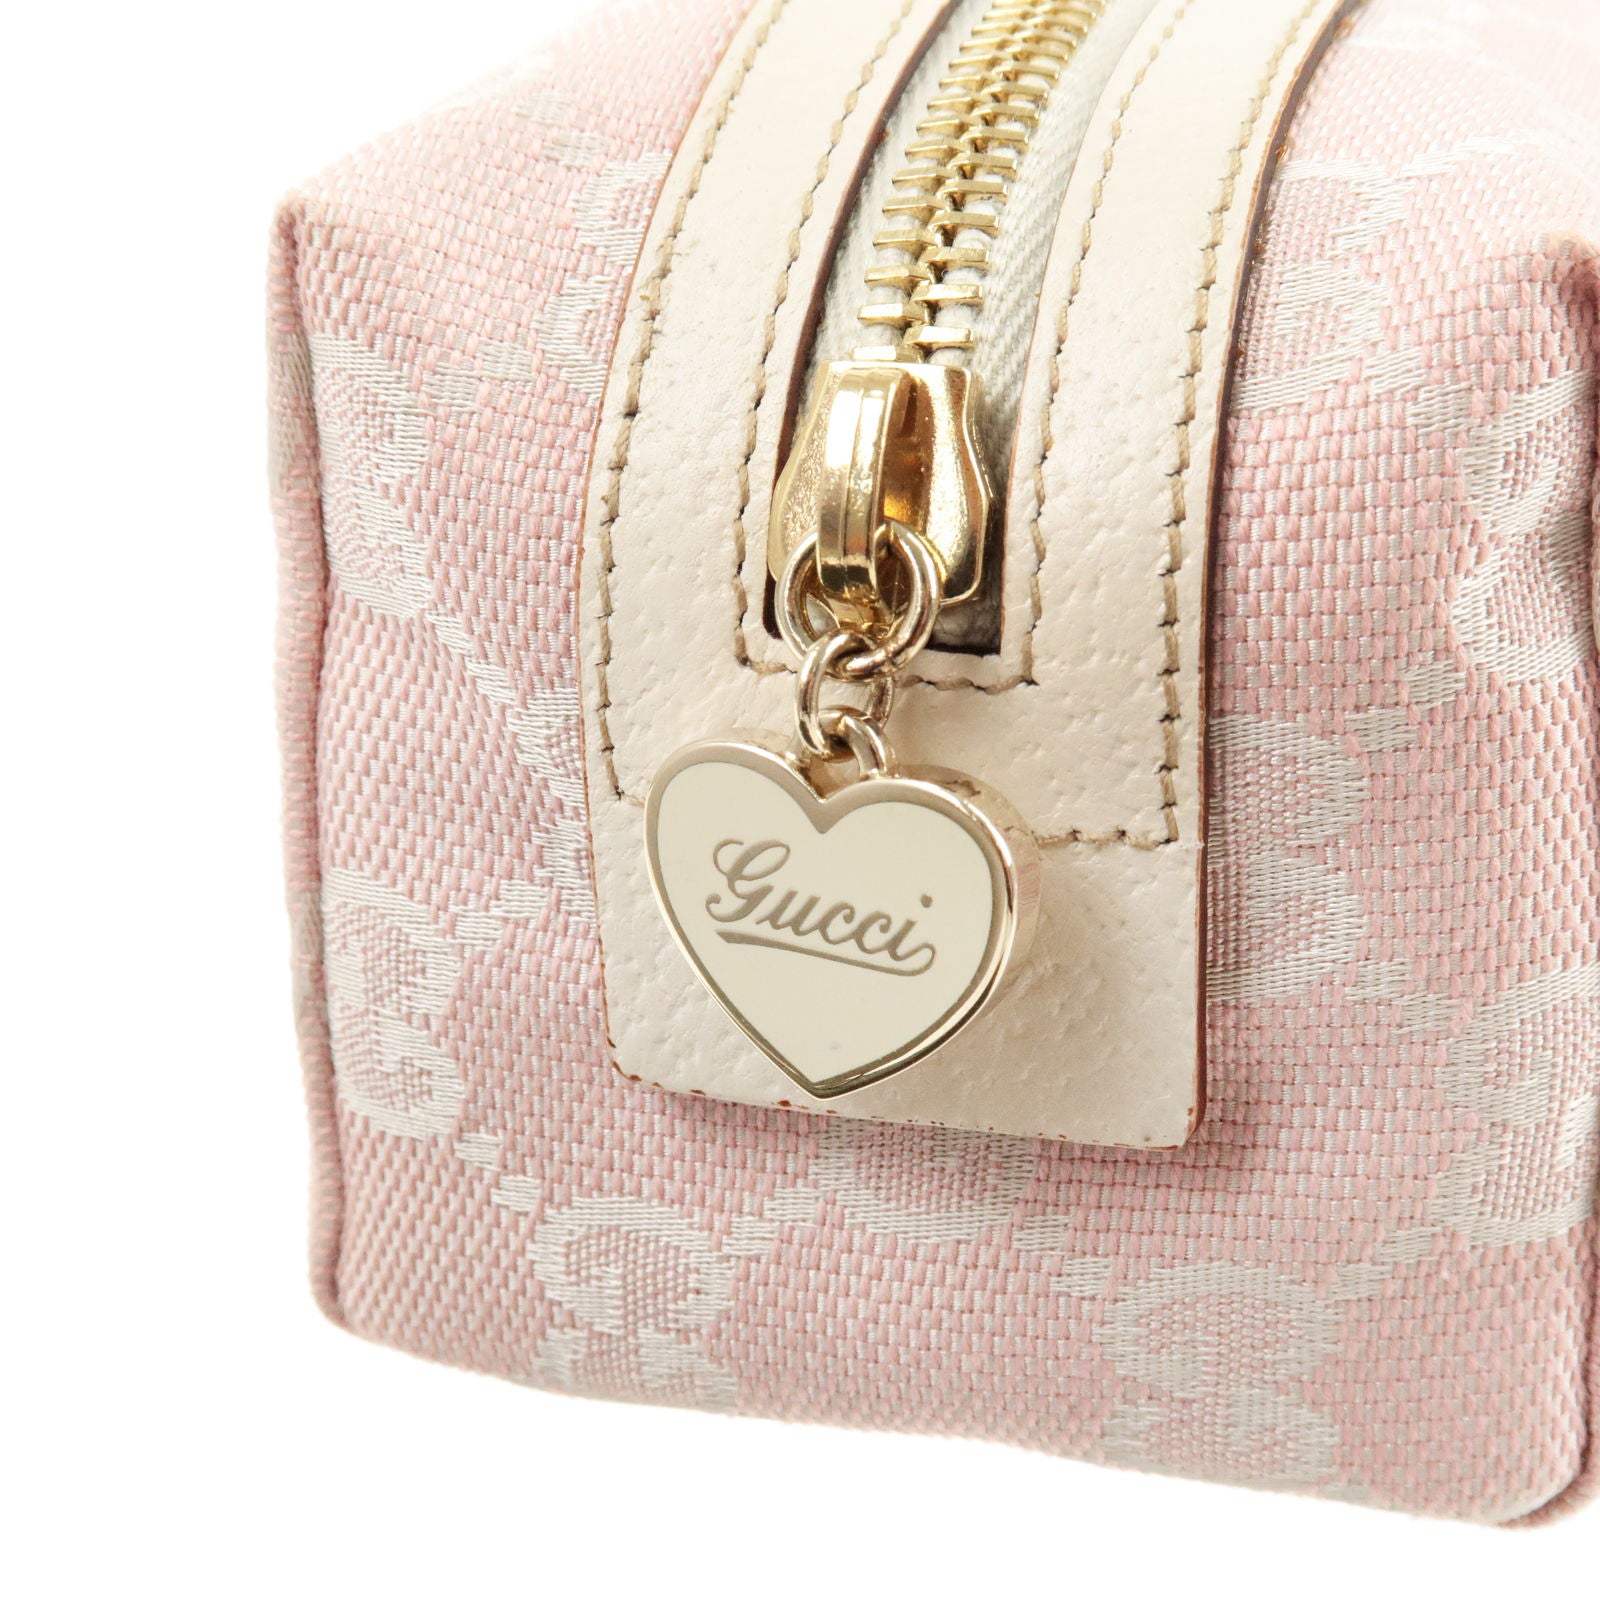 GUCCI-GG-Canvas-Leather-Pouch-Cosmetic-Bag-Pink-Ivory-153228 –  dct-ep_vintage luxury Store